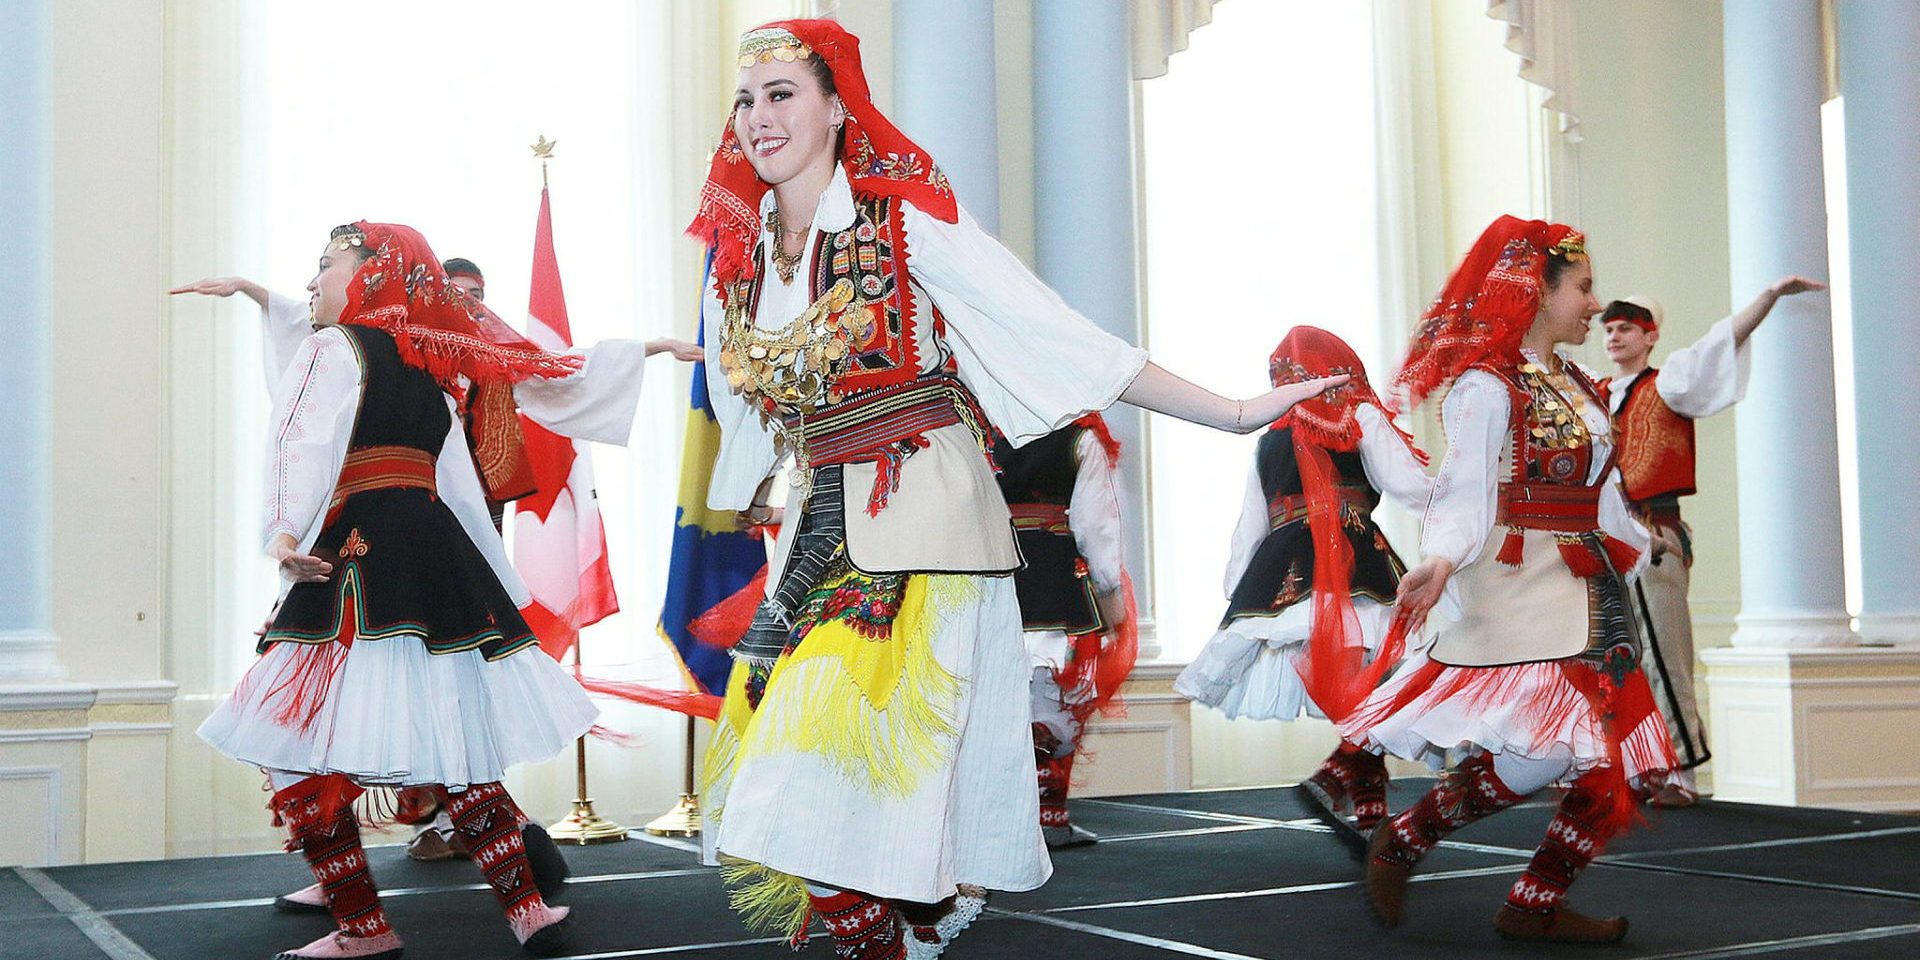 Traditional Albanian folk dance group Shqiponjat
e Vogla performs for guests.